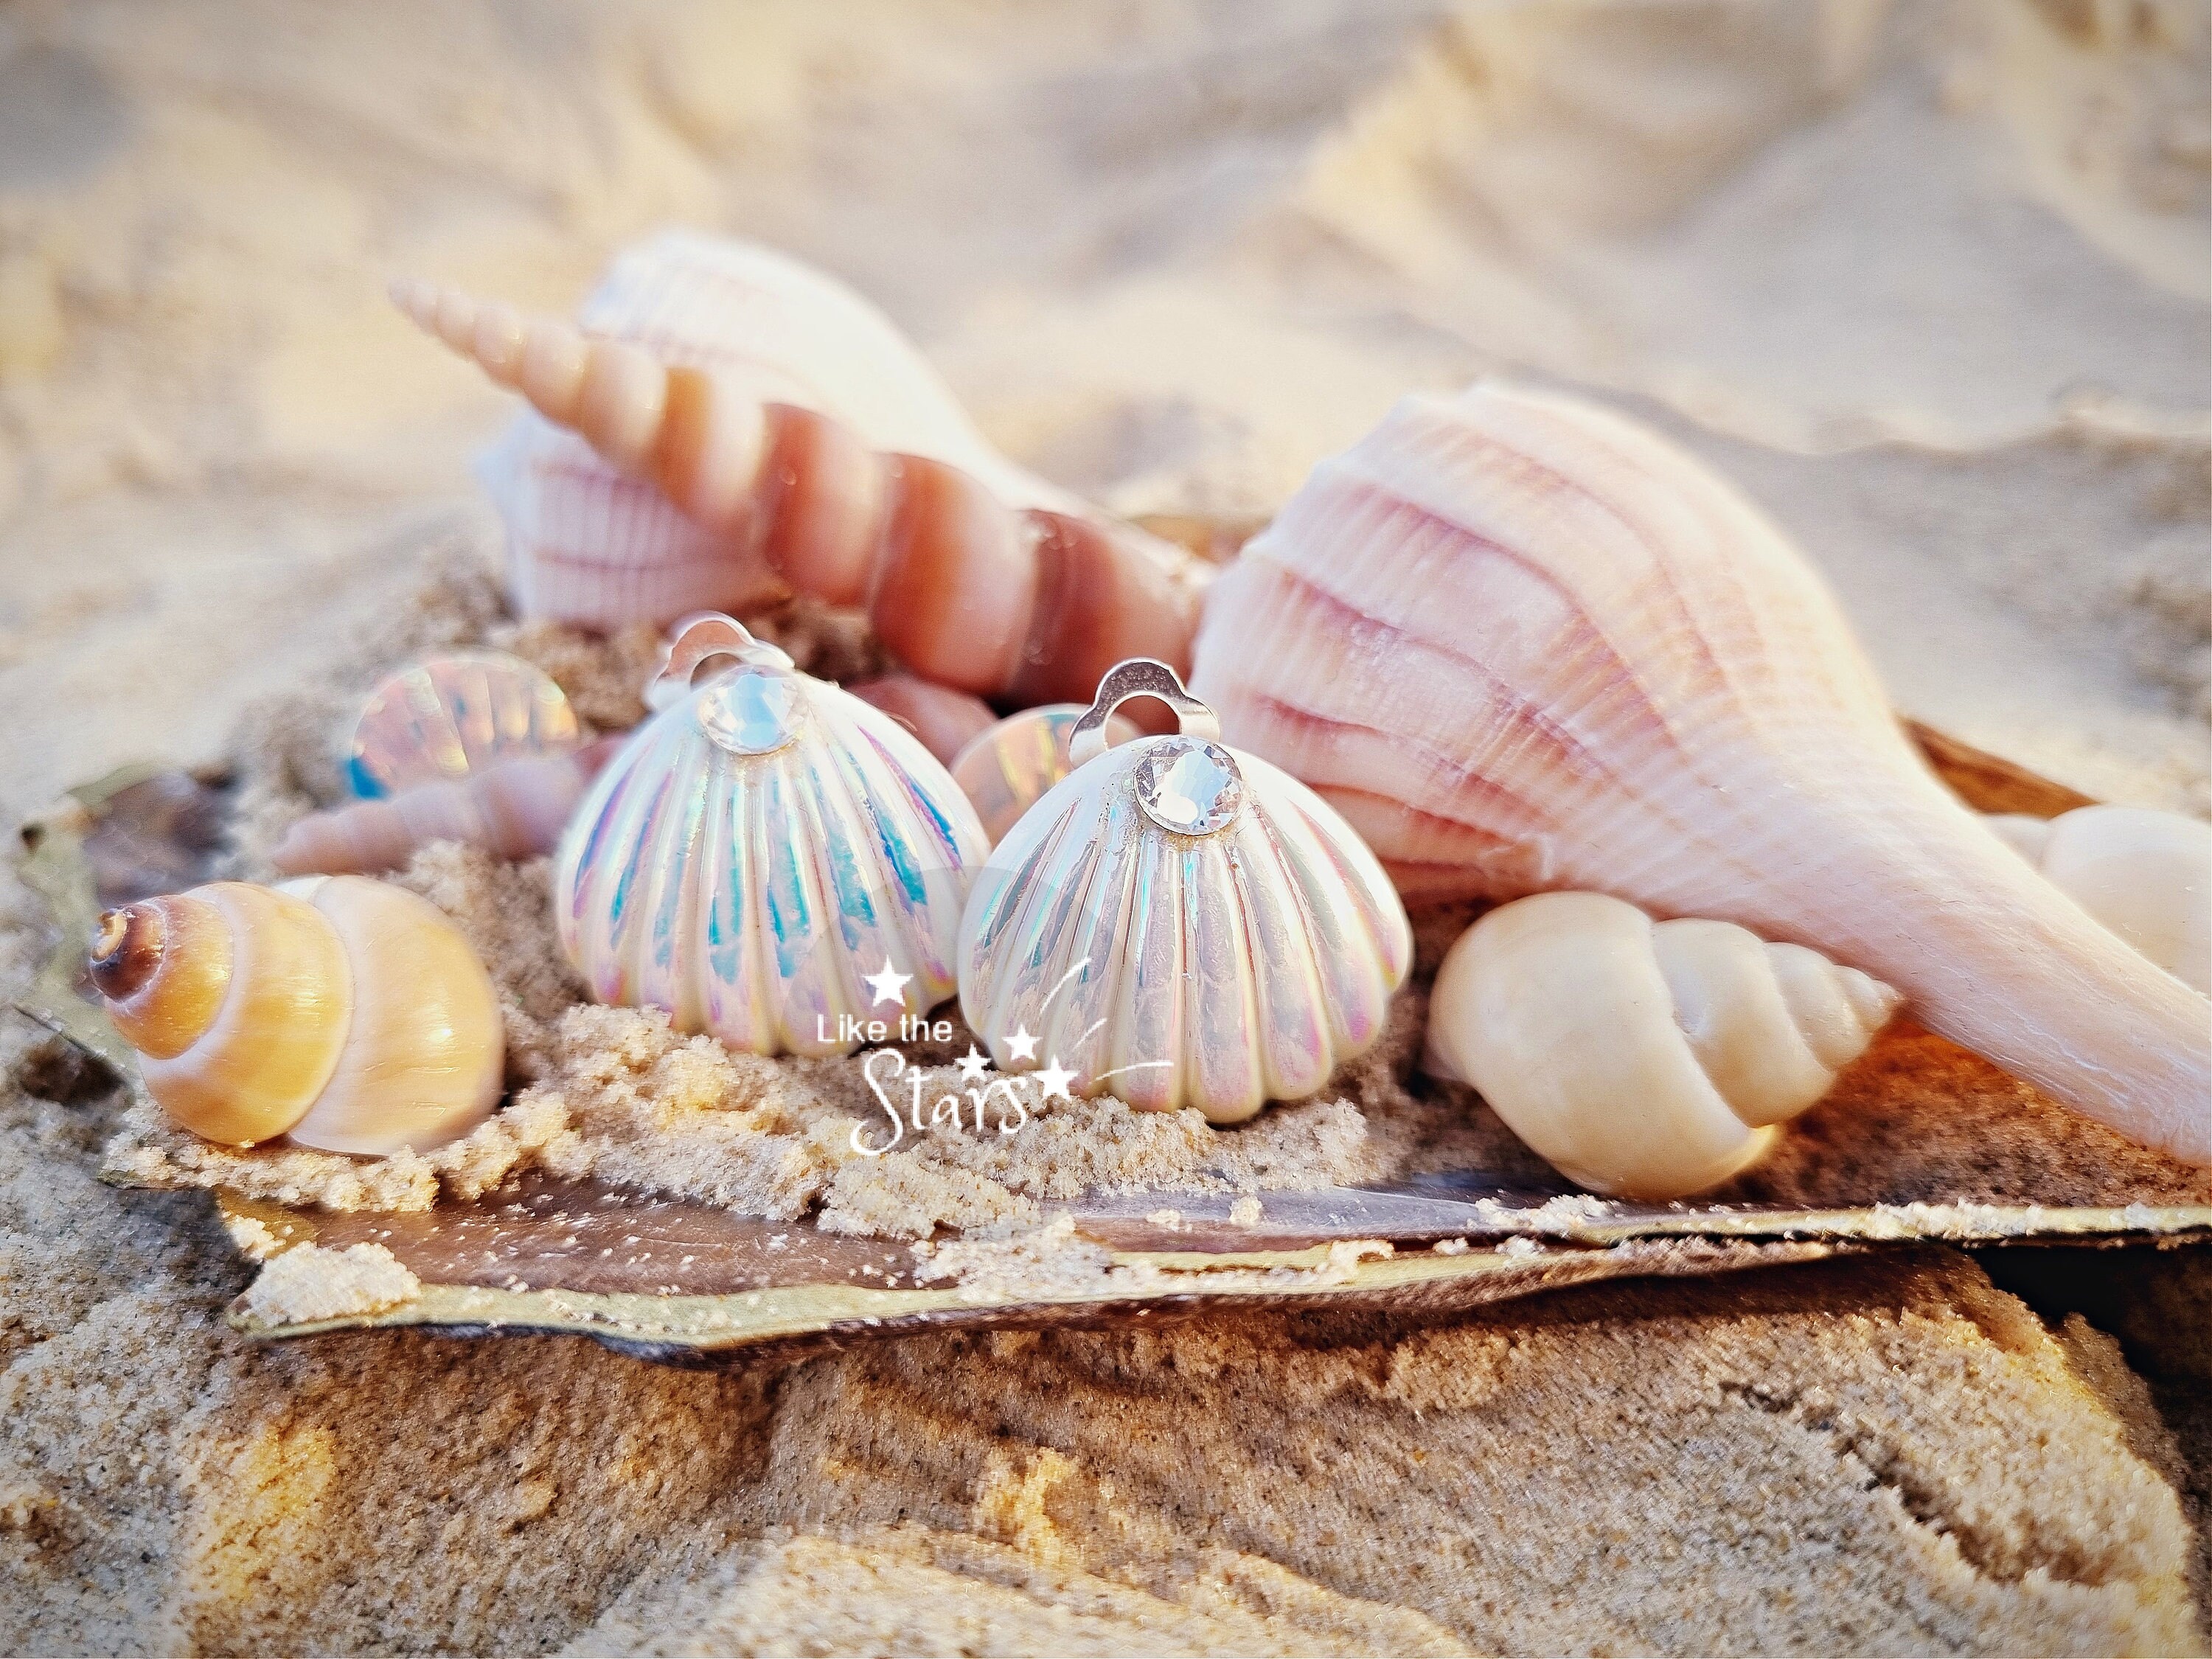 10 Ariel-approved ways to decorate with seashells - GirlsLife